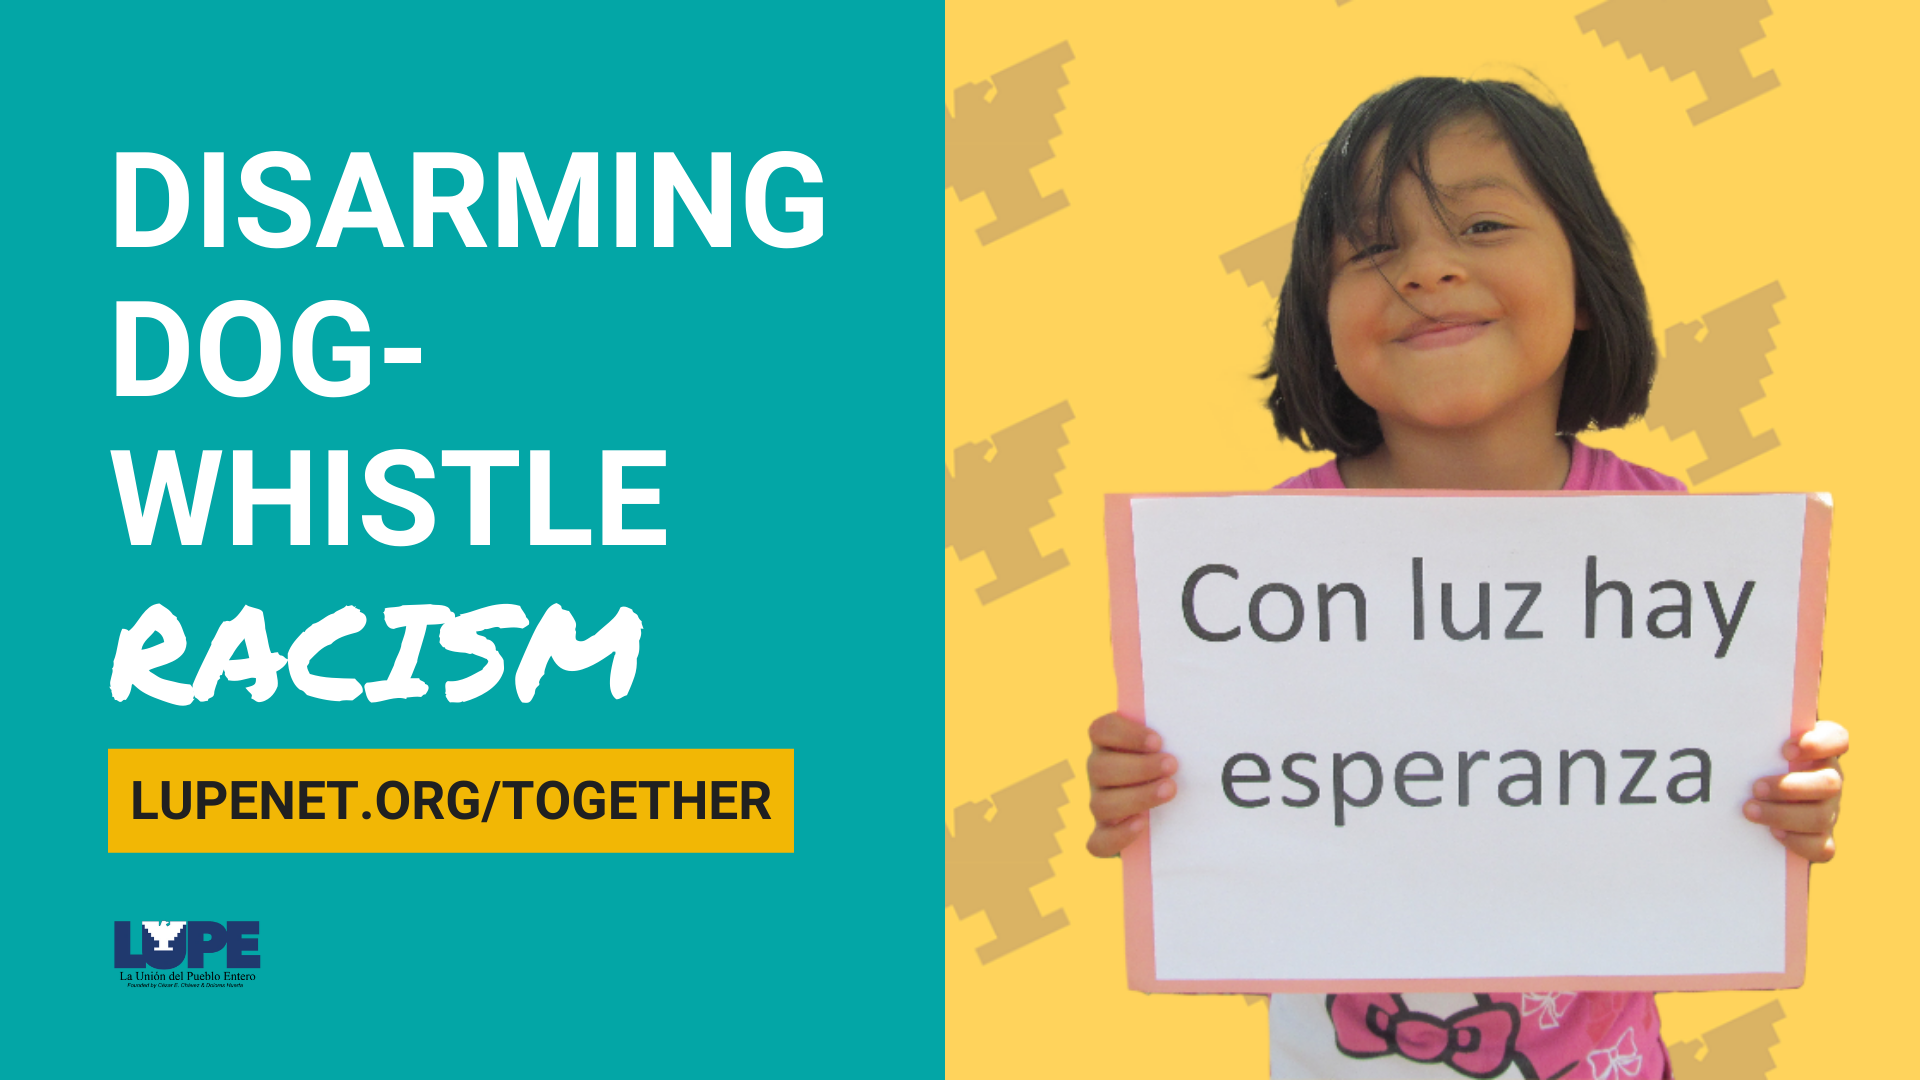 graphic that says "disarming dog-whistle racism alongside an image of a young girl holding a sign that says "con luz hay esperanza" or "With light there is hope".